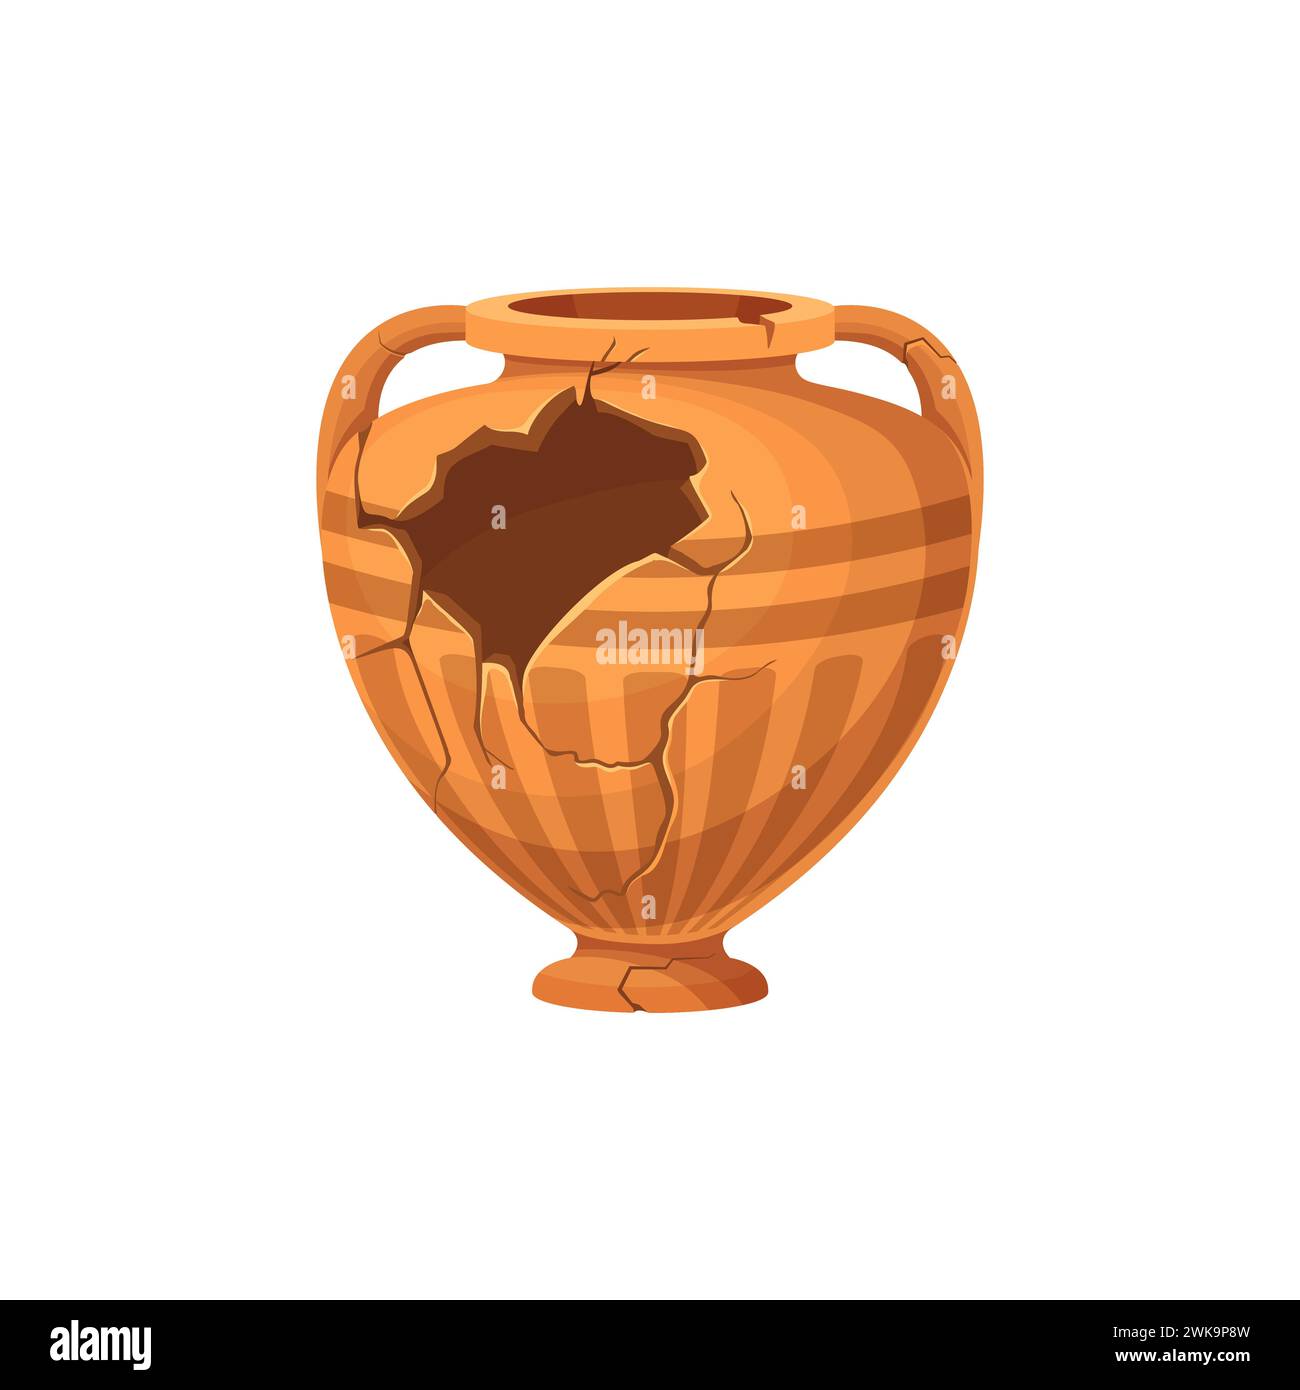 Ancient broken vase and pottery. Old ceramic cracked pot or jug. Isolated cartoon vector antique clay urn or jar, greece or roman amphora. Historical archeological vintage artefact for museum exhibit Stock Vector